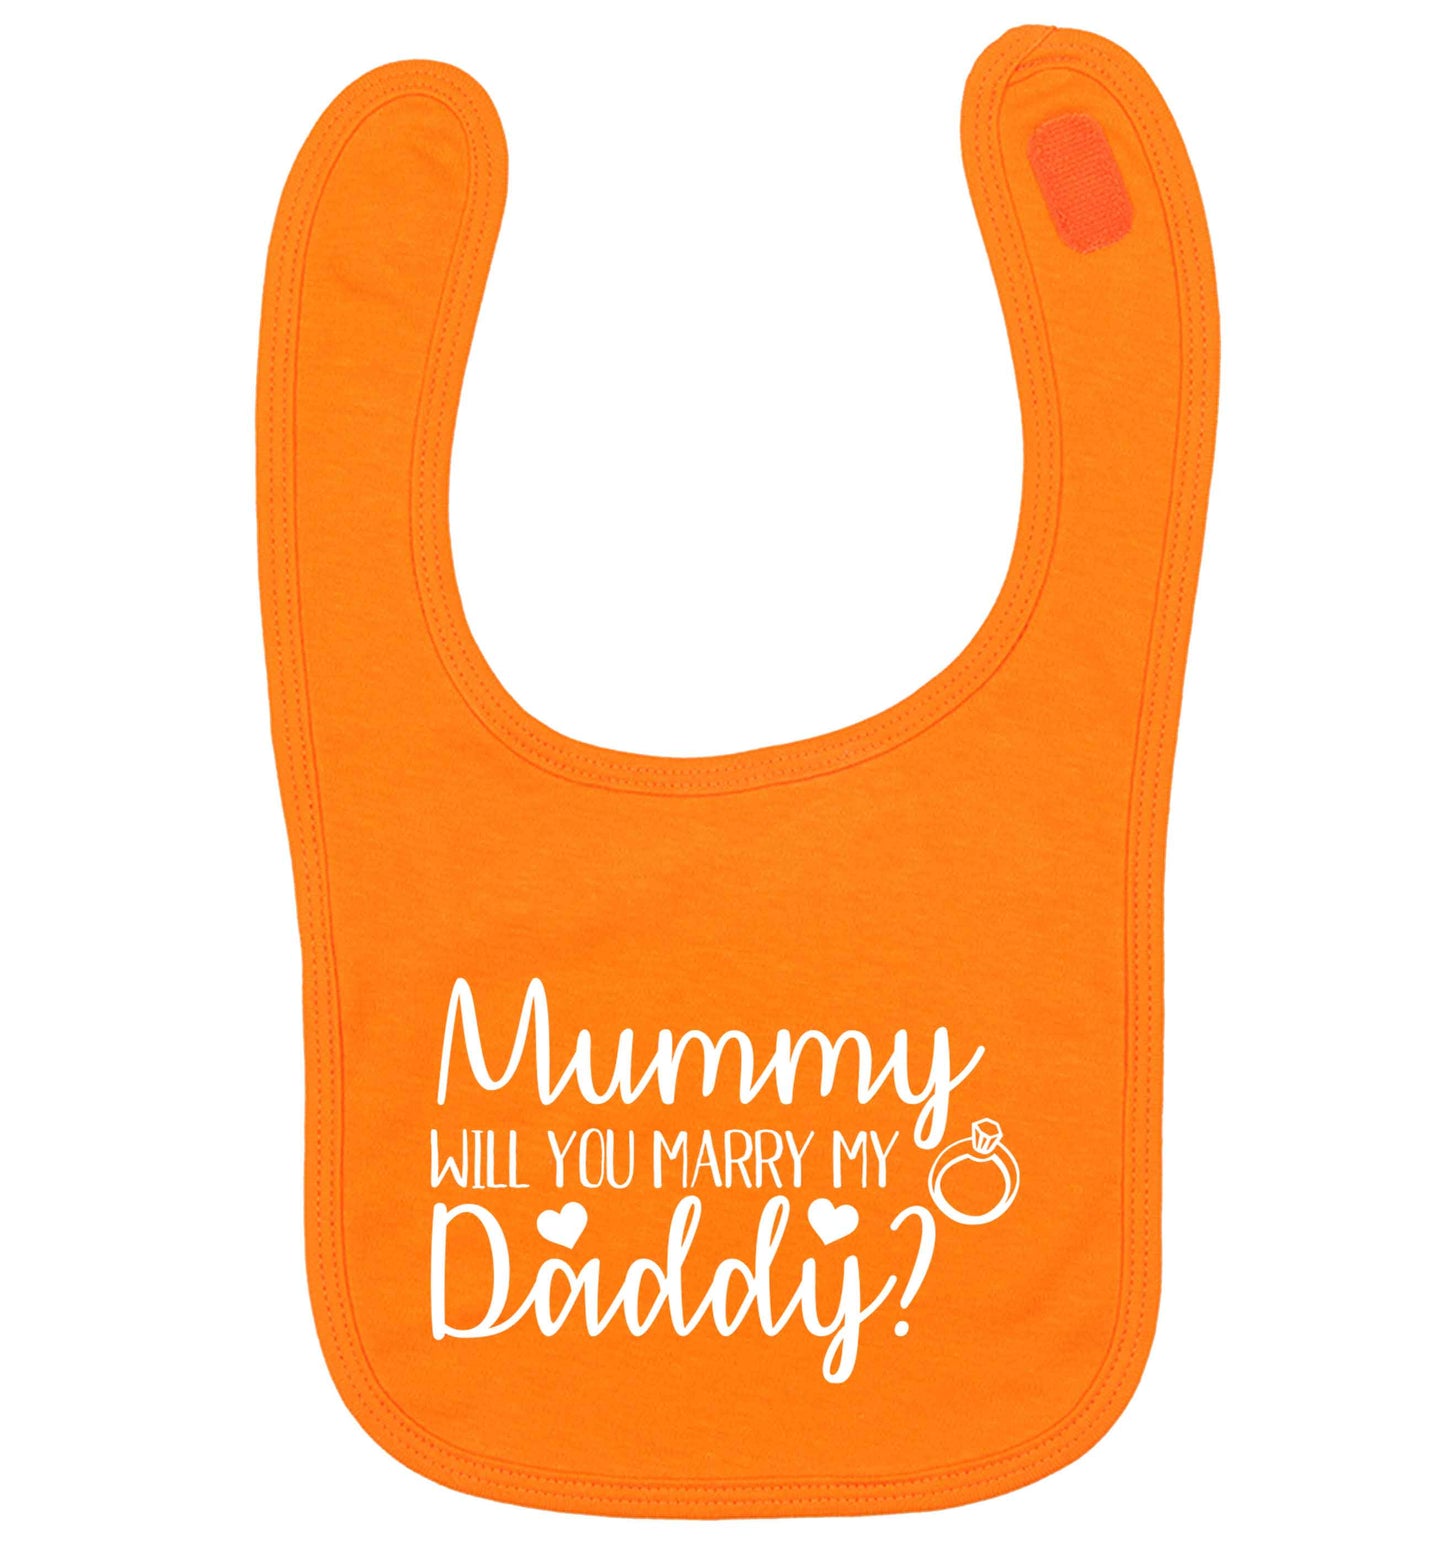 Looking for a unique way to pop the question? Why not let your kids do it!  orange baby bib